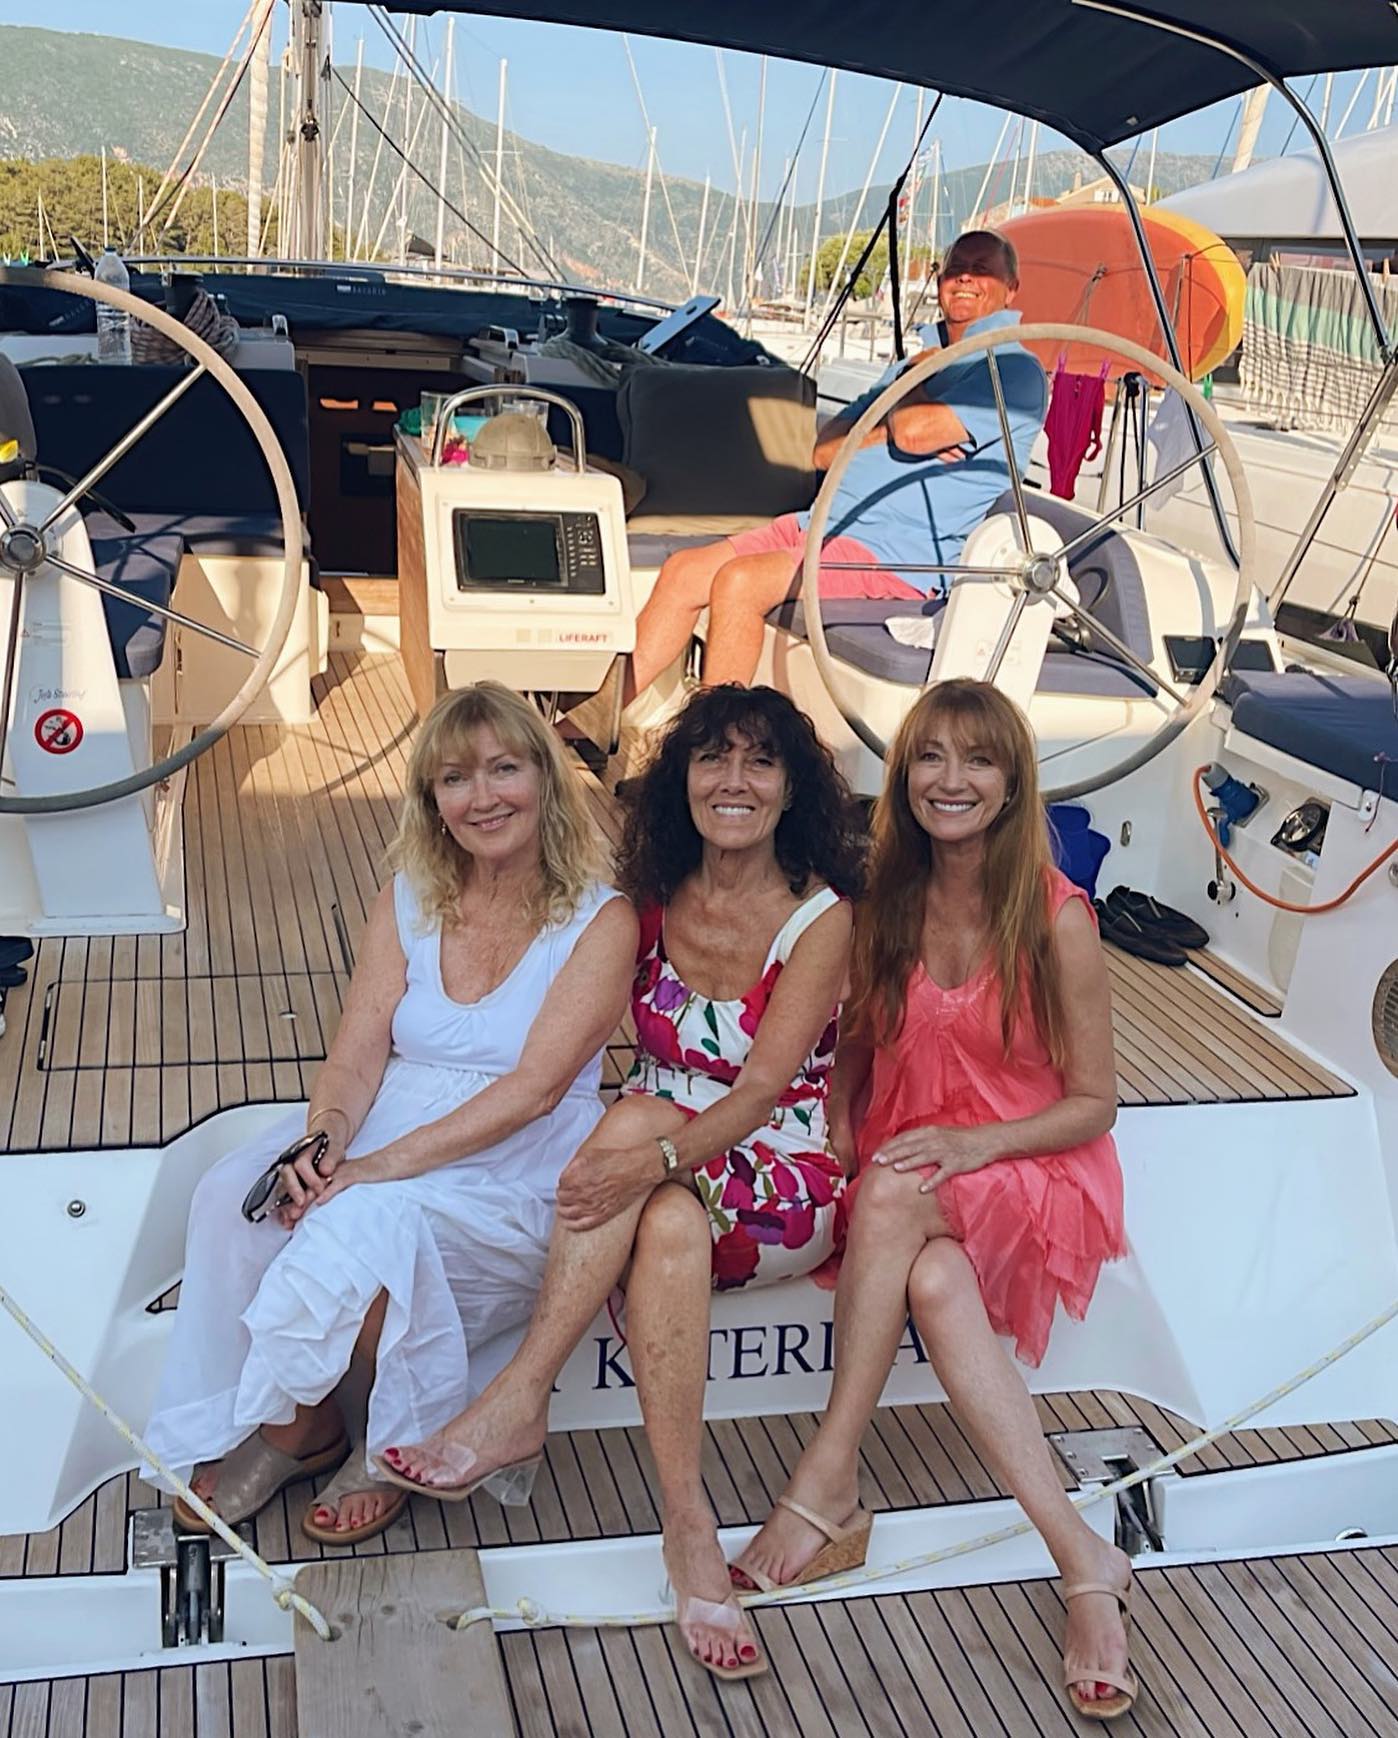 Photo by Jane Seymour OBE in Greece with @sallyfrankenberg and @anniemjgould. May be an image of 3 people sail ship yacht and houseboat